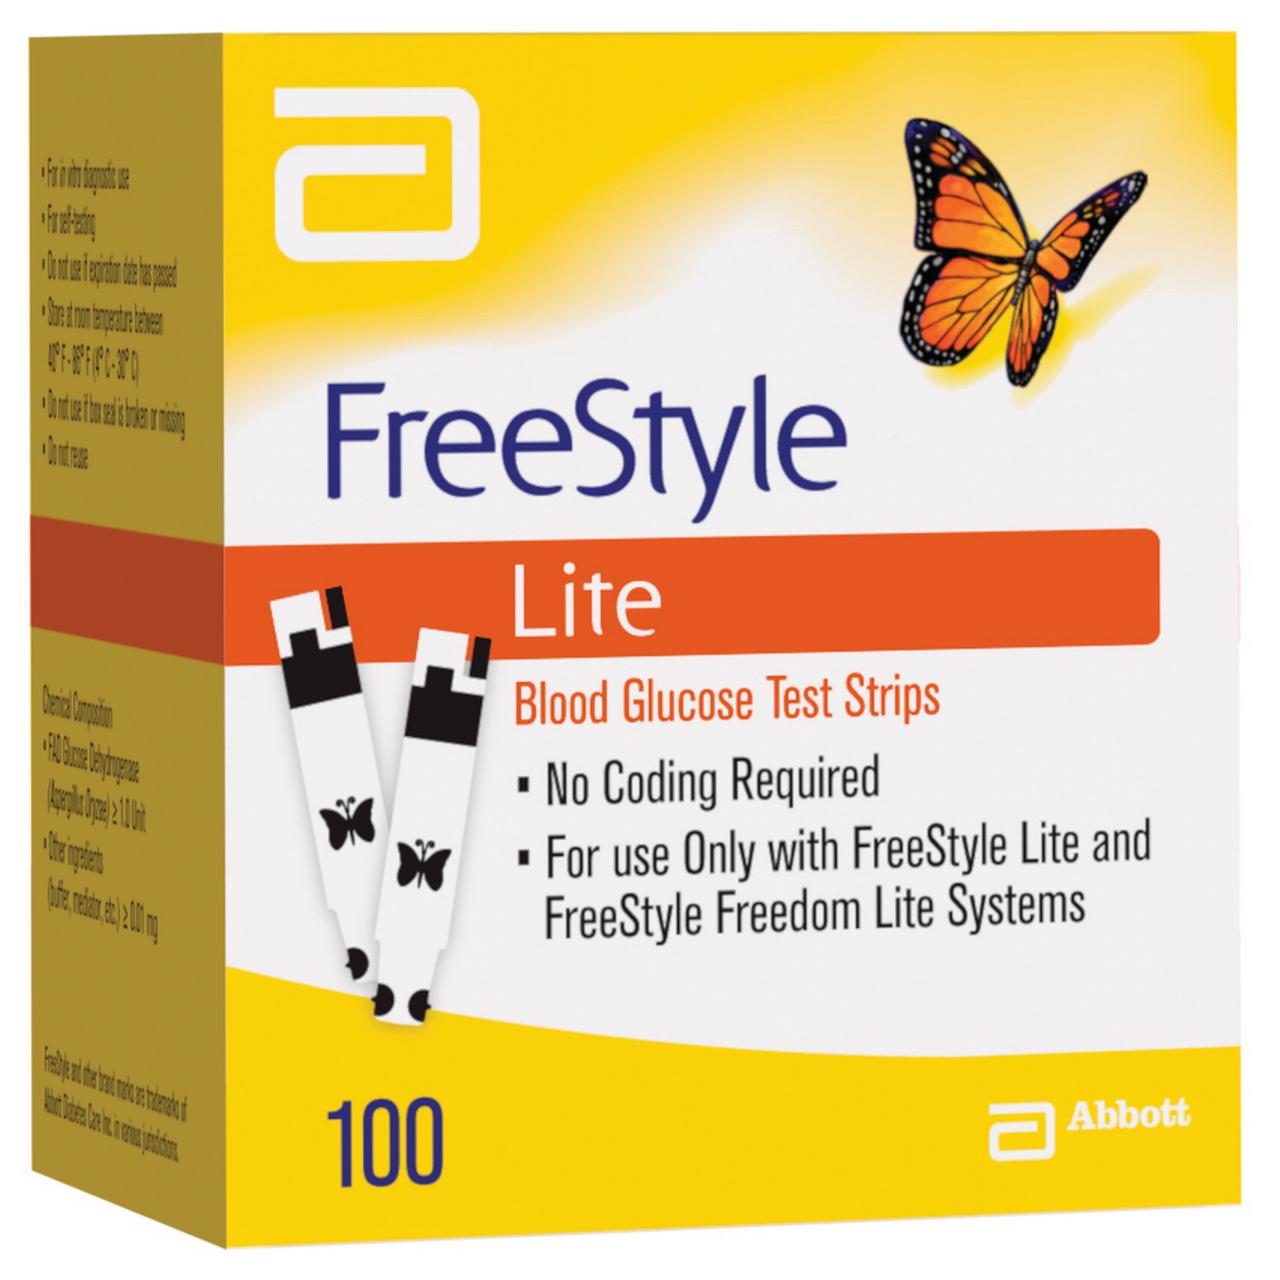 FreeStyle Lite Blood Glucose Test Strips, 100 Count - image 1 of 5